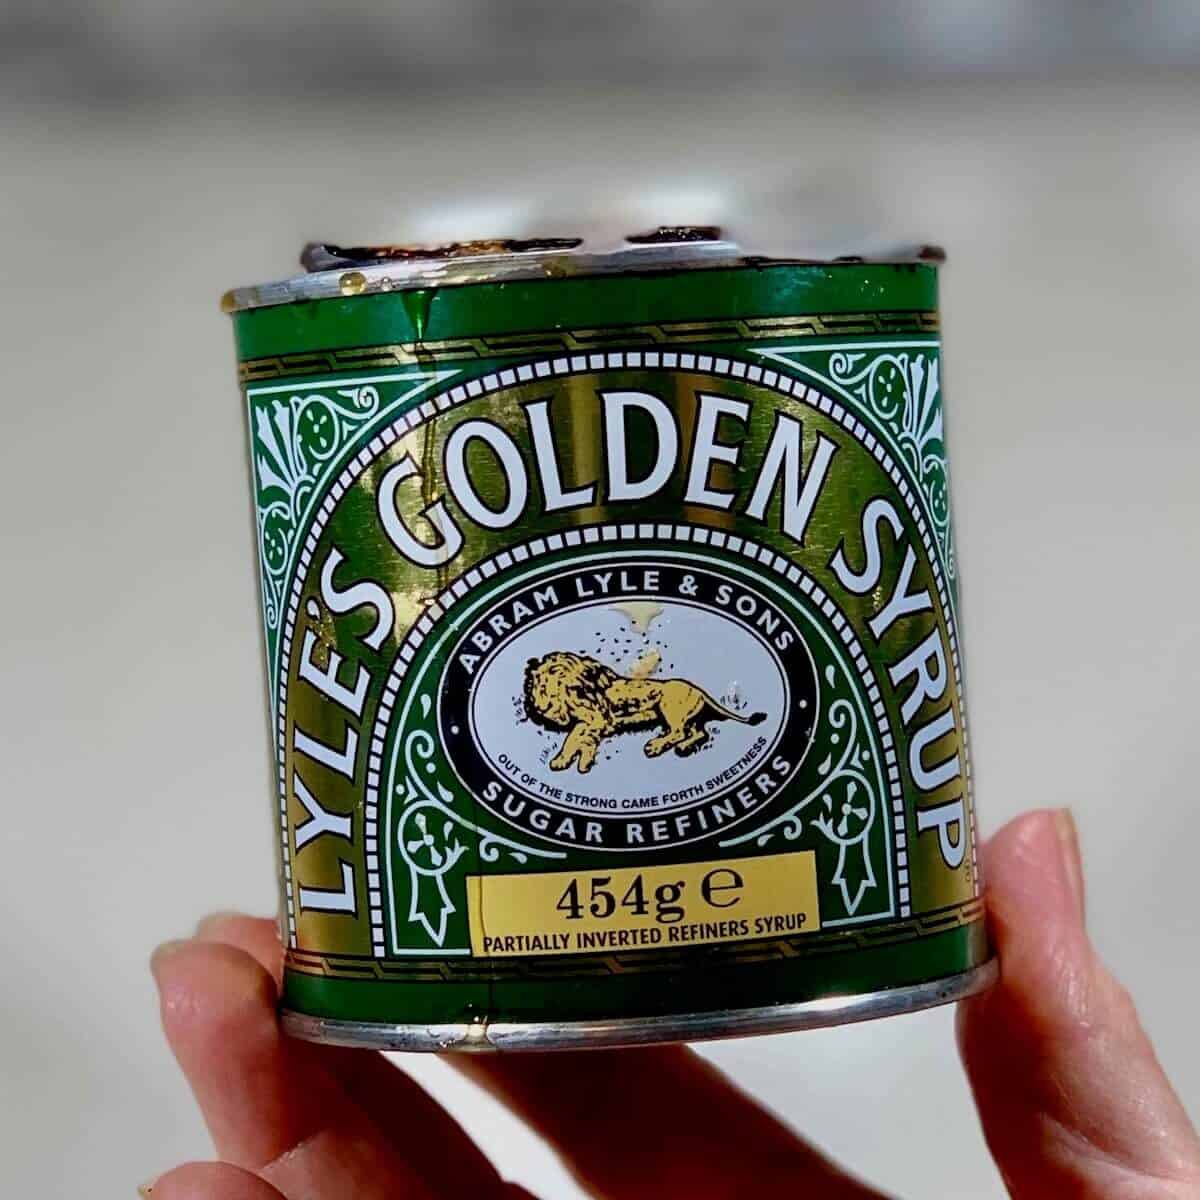 Lyle's Golden Syrup in the can.